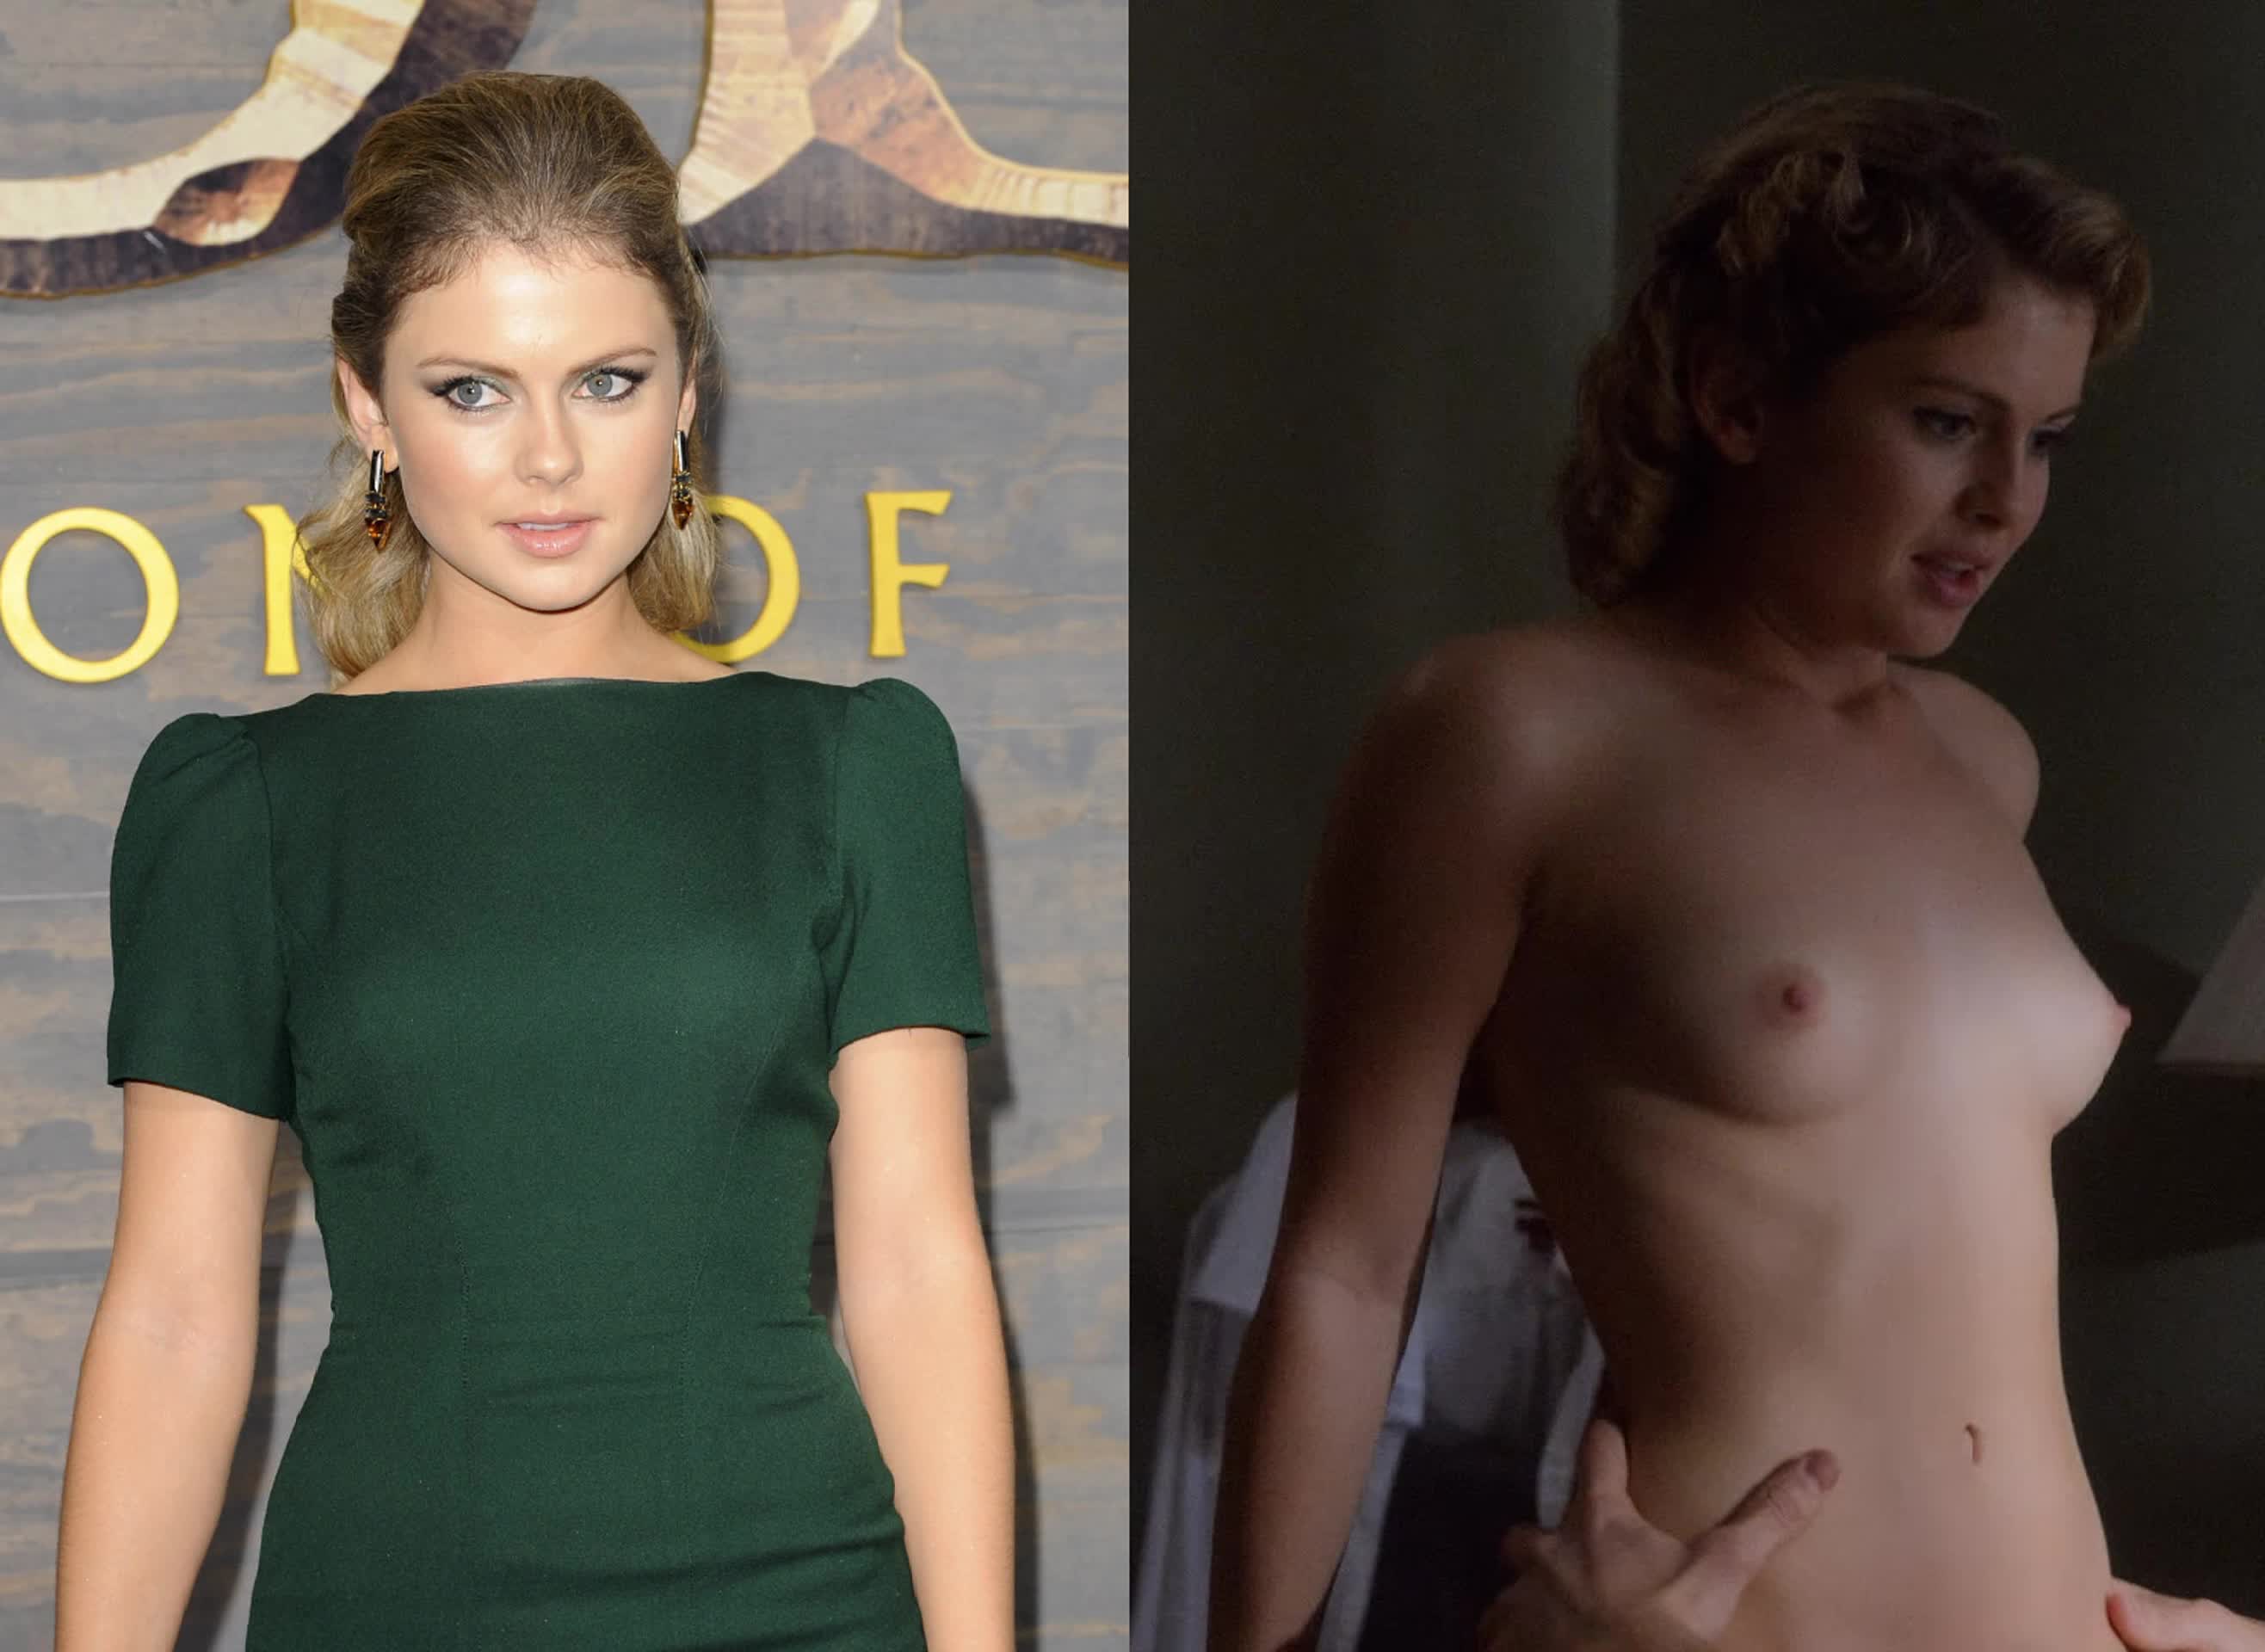 Nude celebs: Rose McIver on/off - GIF Video.